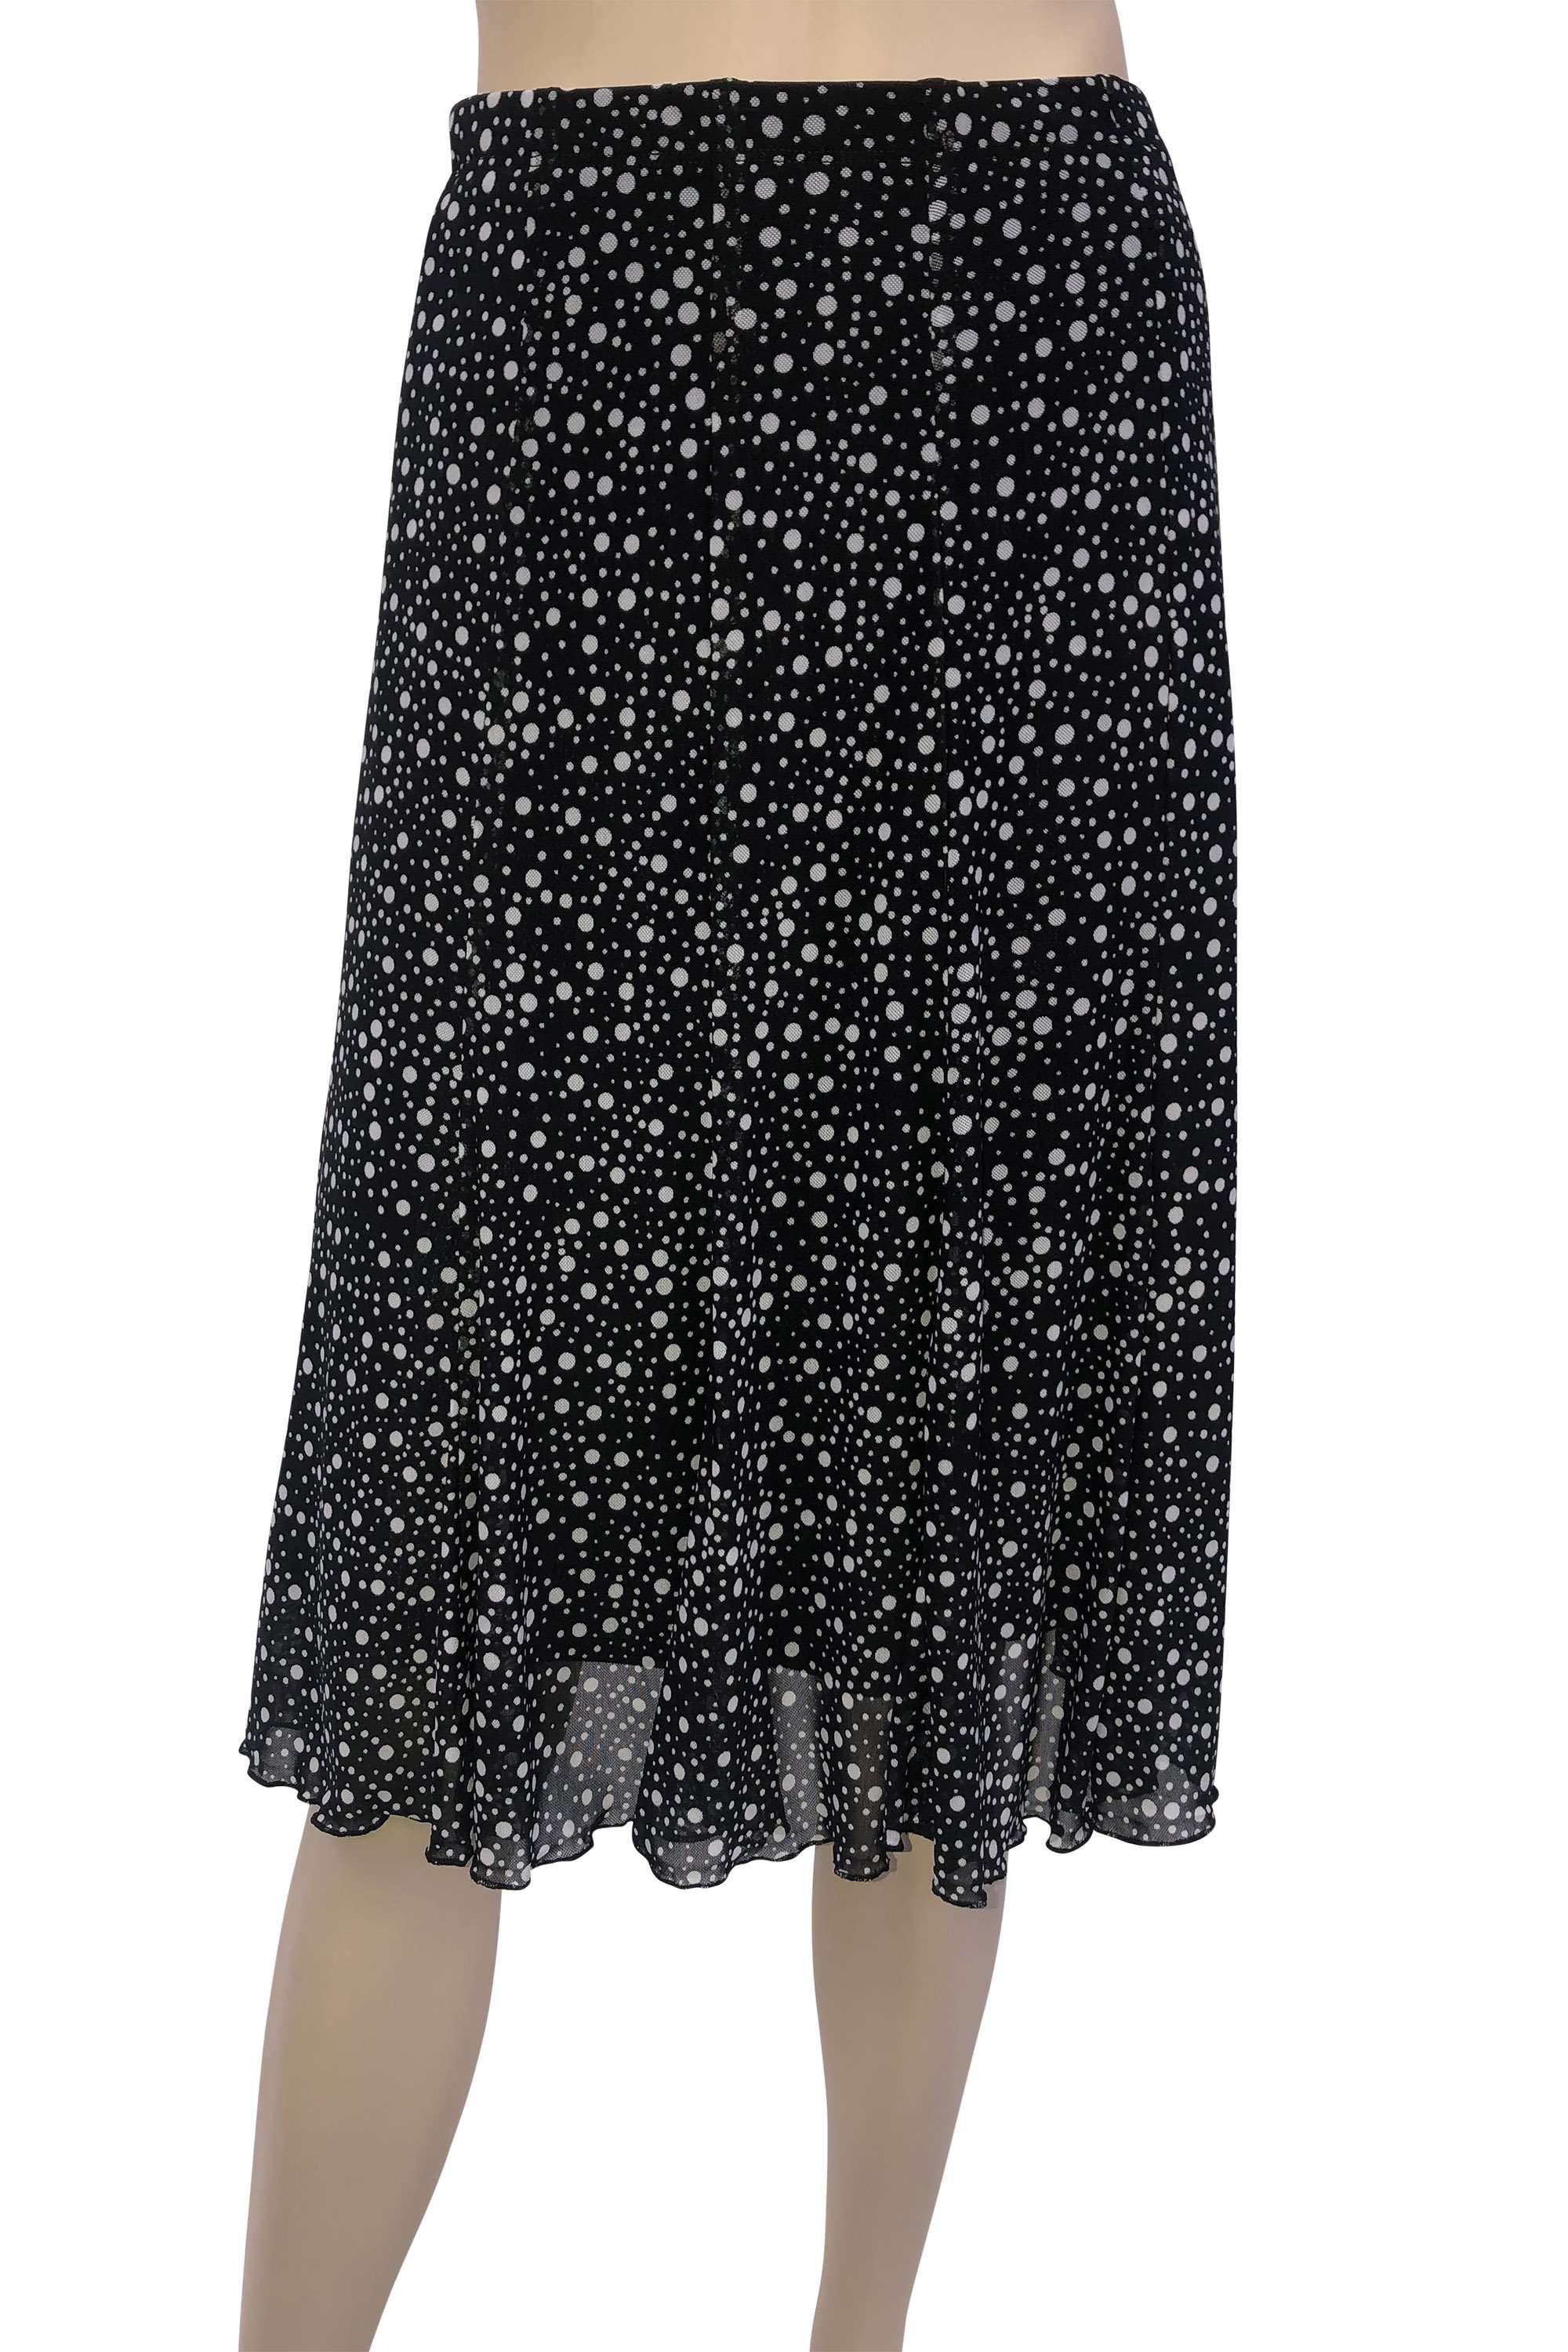 Women's Skirts On Sale Canada Black Polka Dot Layered Skirt Fully Lined Amazing Fit Quality Made in Canada Now On Sale - Yvonne Marie - Yvonne Marie